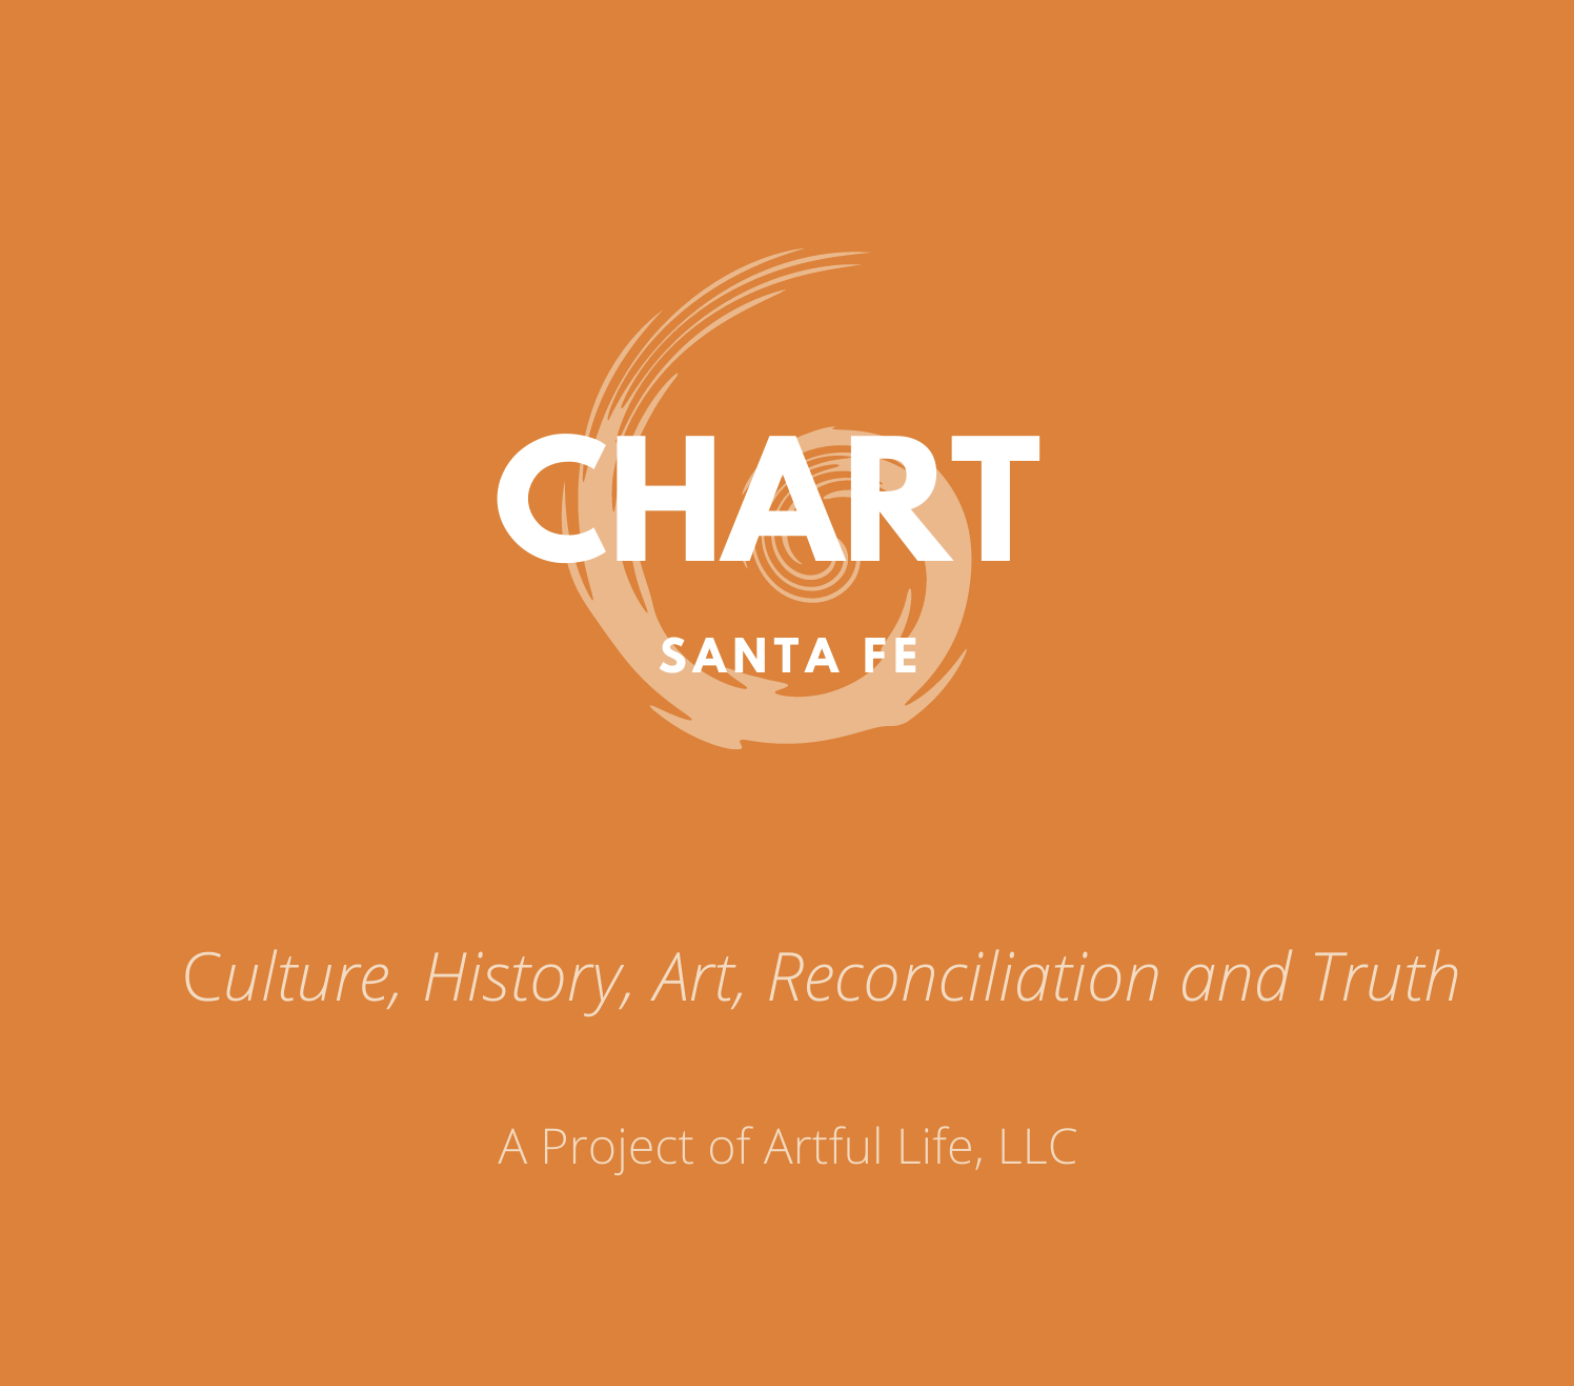 A logo from CHART in Santa Fe, with the text "Culture, History, Art, Reconciliation and Truth, a project of artful life, LLC"